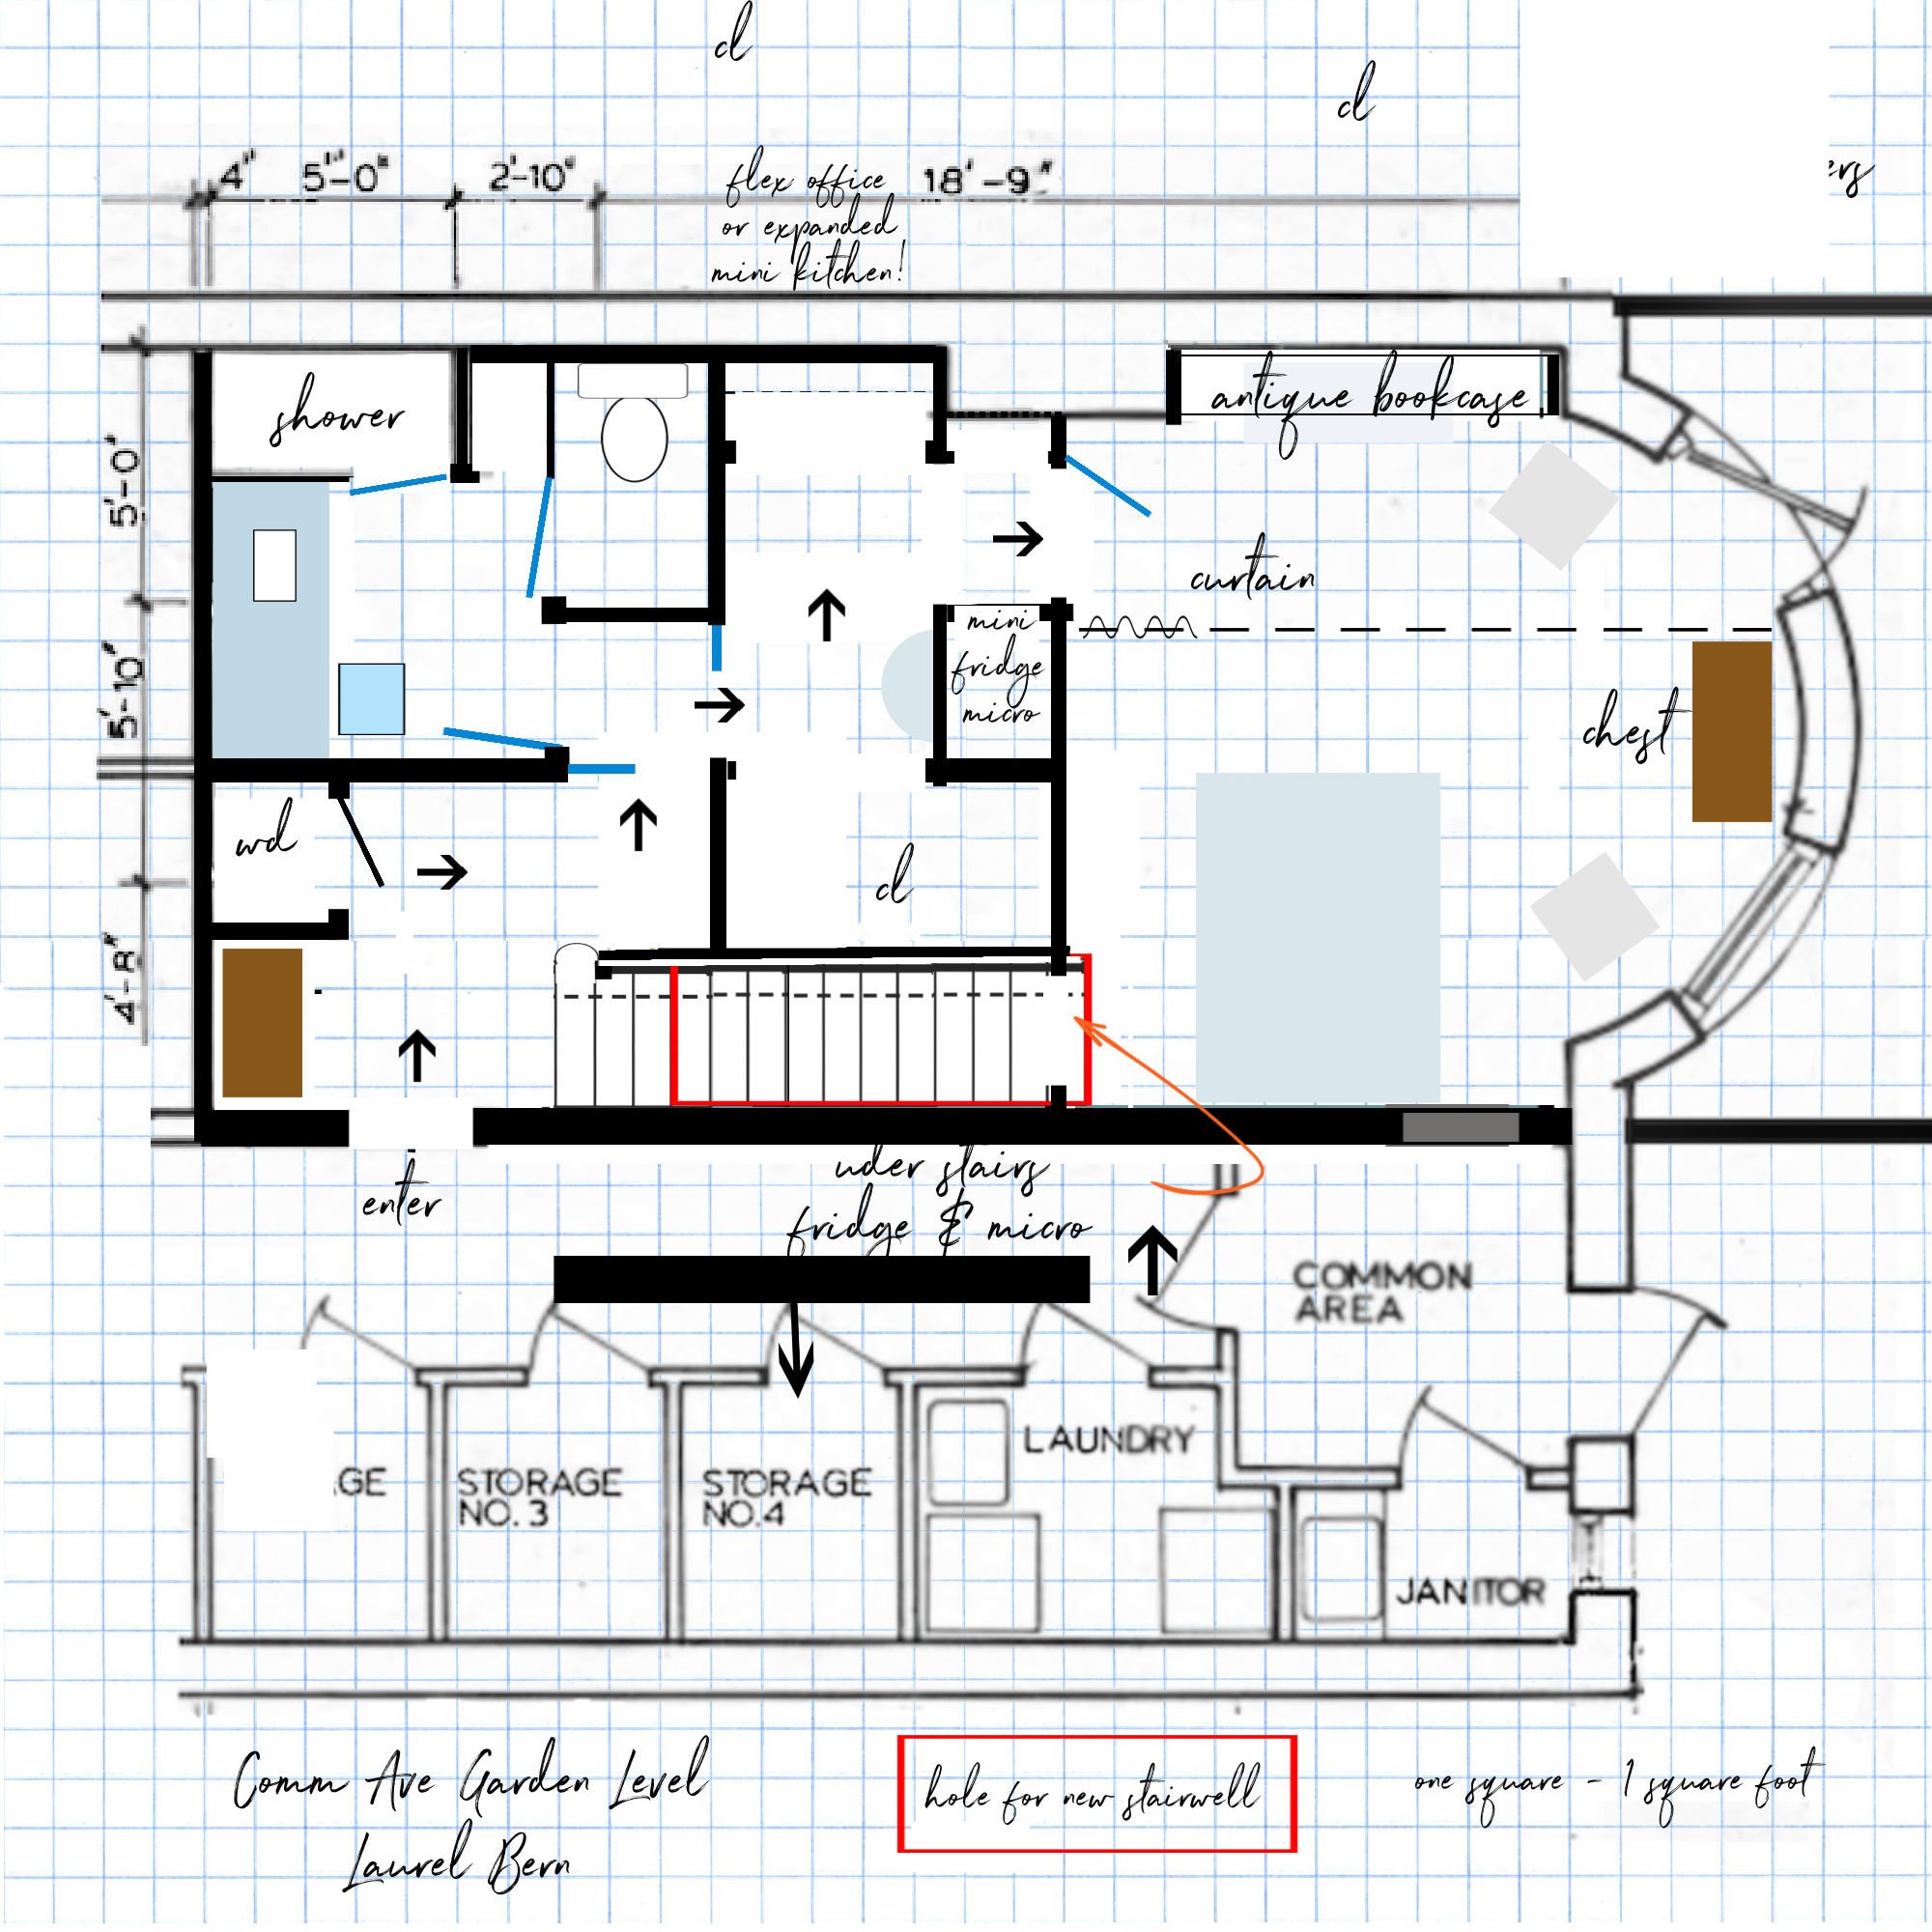 master bedroom suite-Straight run stairs Garden Level July 30, 2022 - flex space galore walk-in closet A